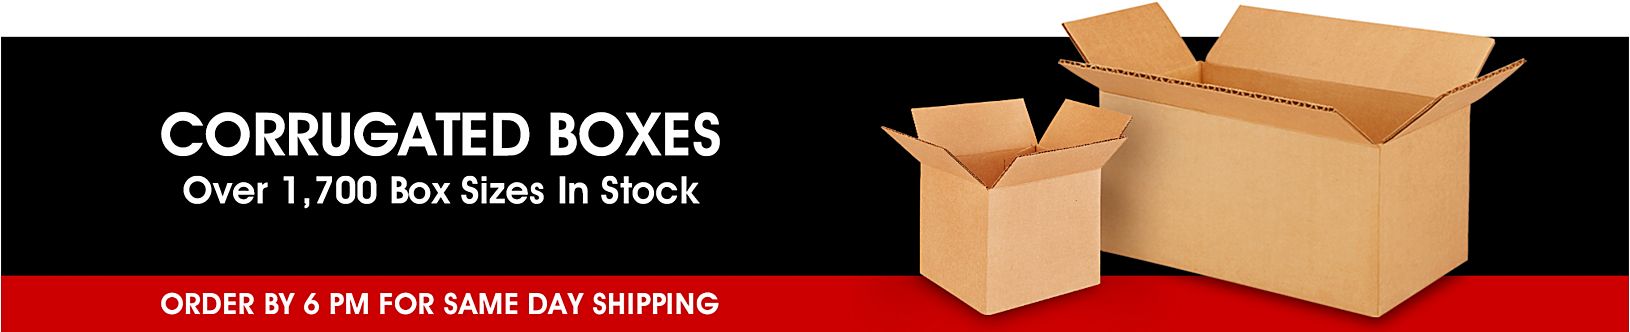 Corrugated Boxes - Over 1,650 Box Sizes in Stock. Order by 6 PM For Same Day Shipping.